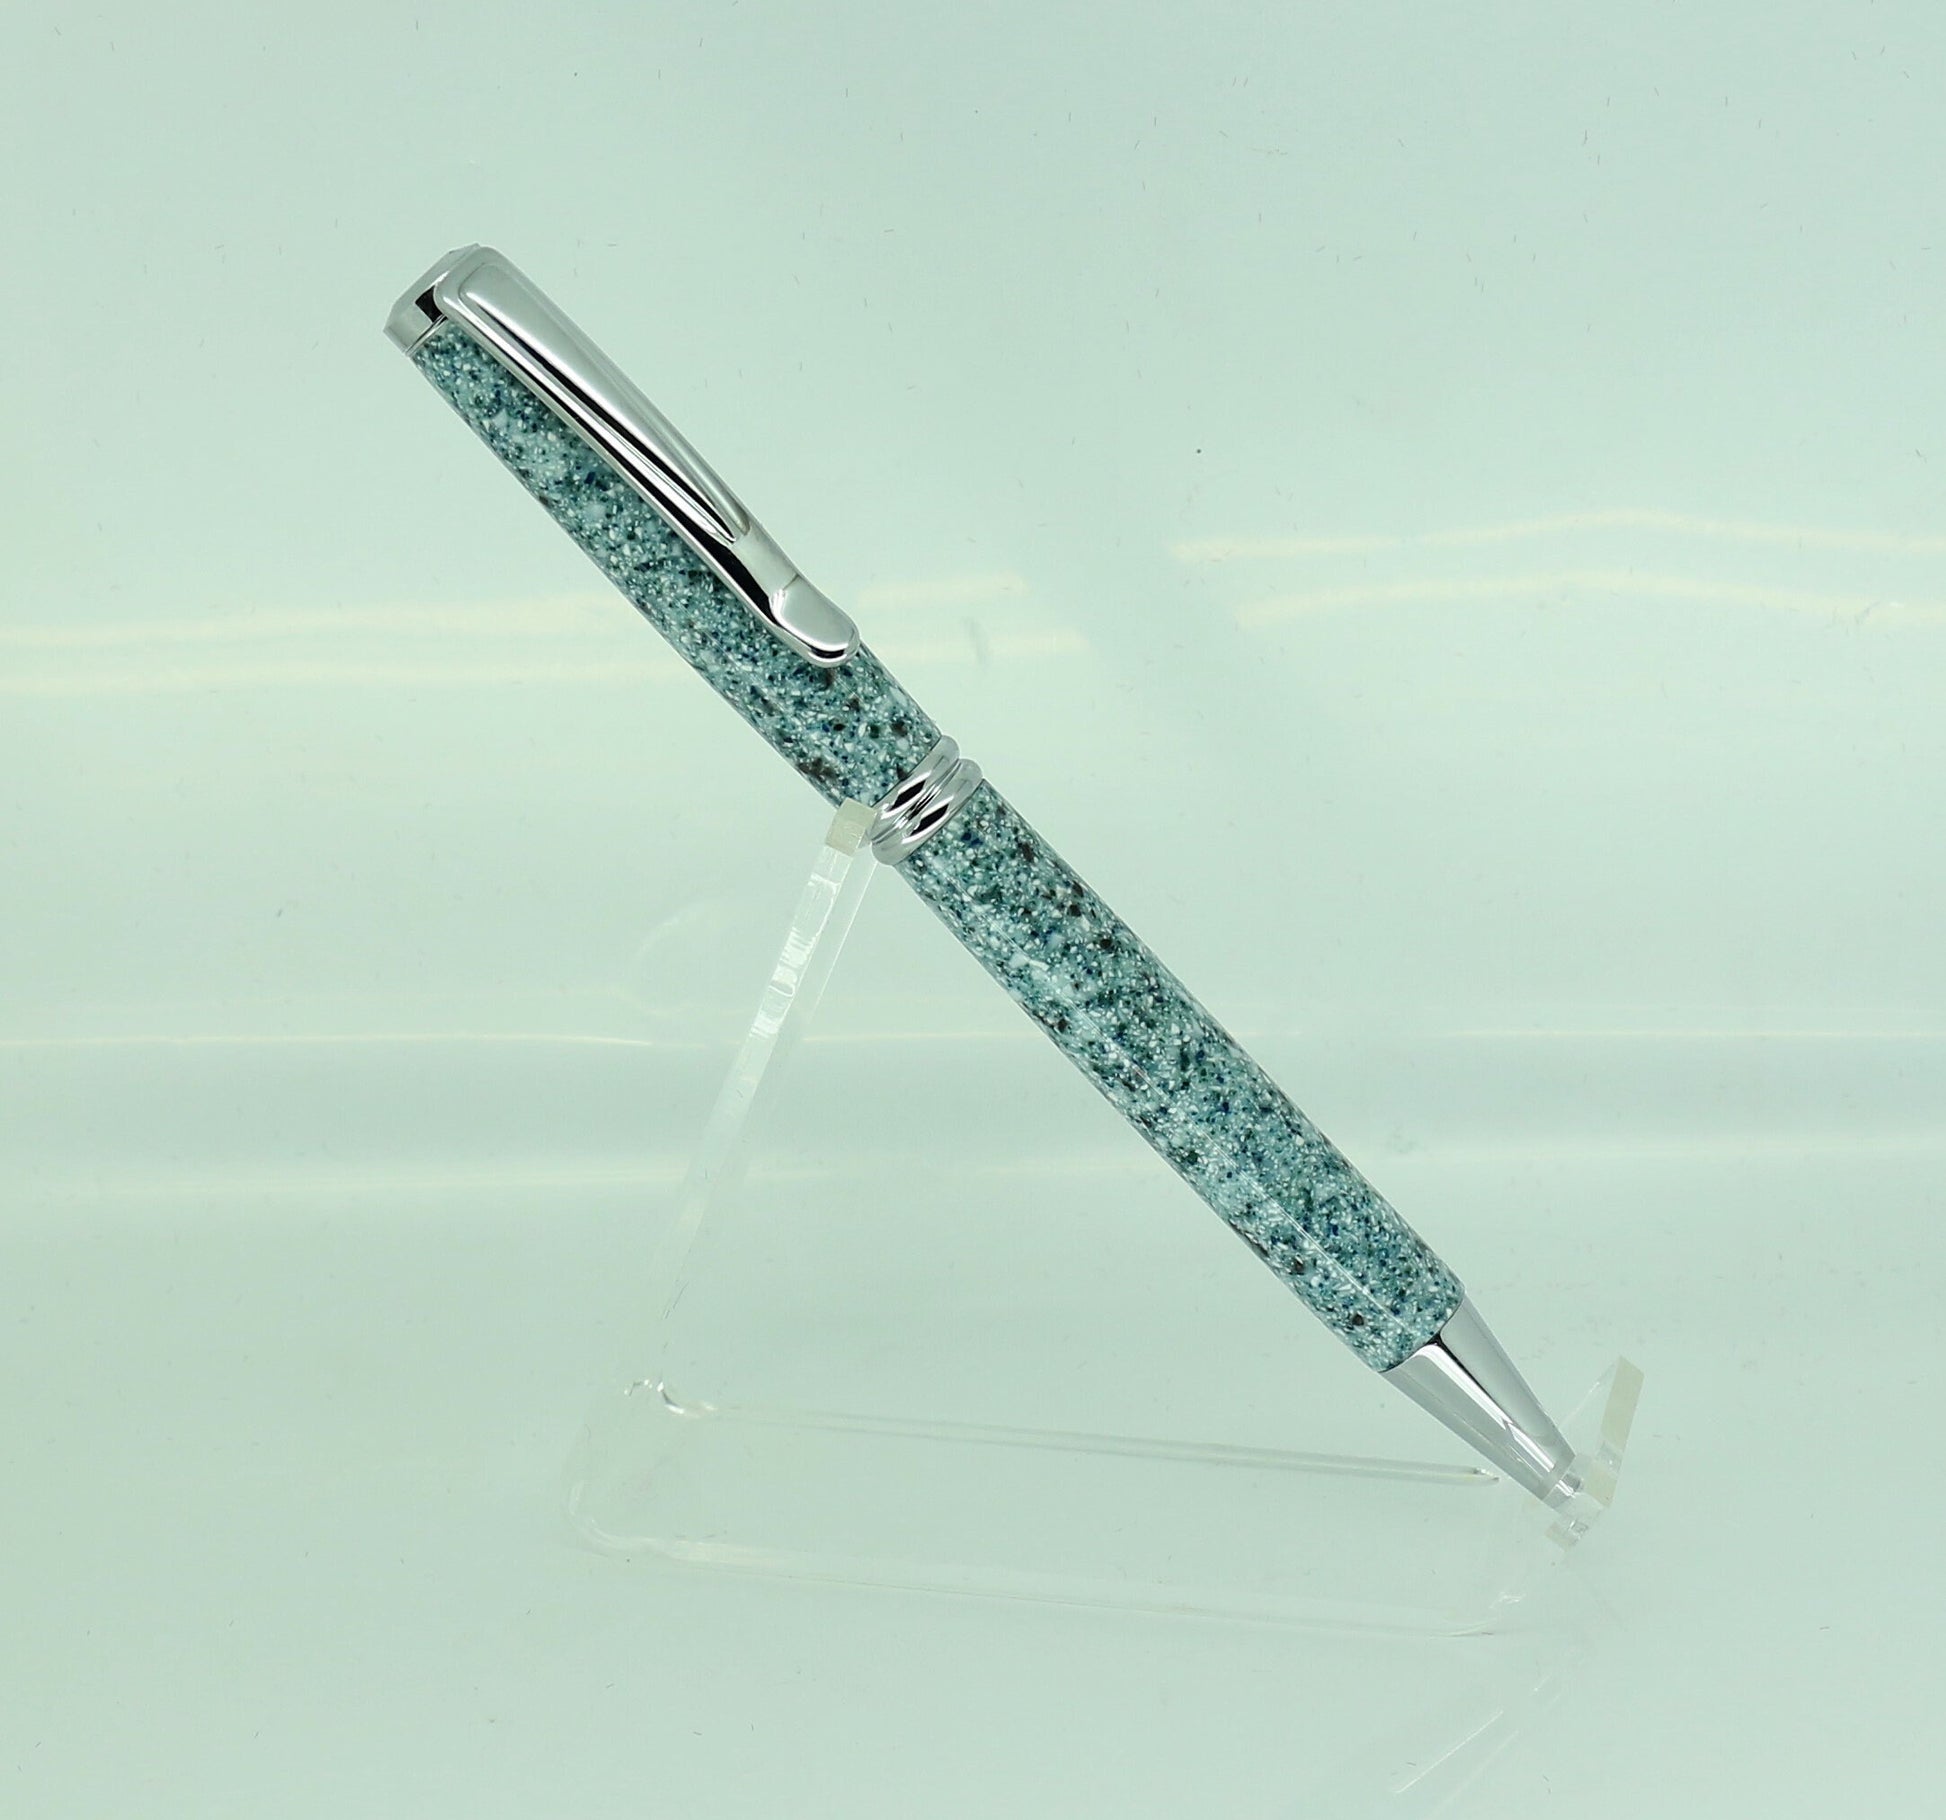 A pen standing upright and showing off the green Corian and mottled colours and effects to the full, complete with Chrome plated fitting to show the effect off.